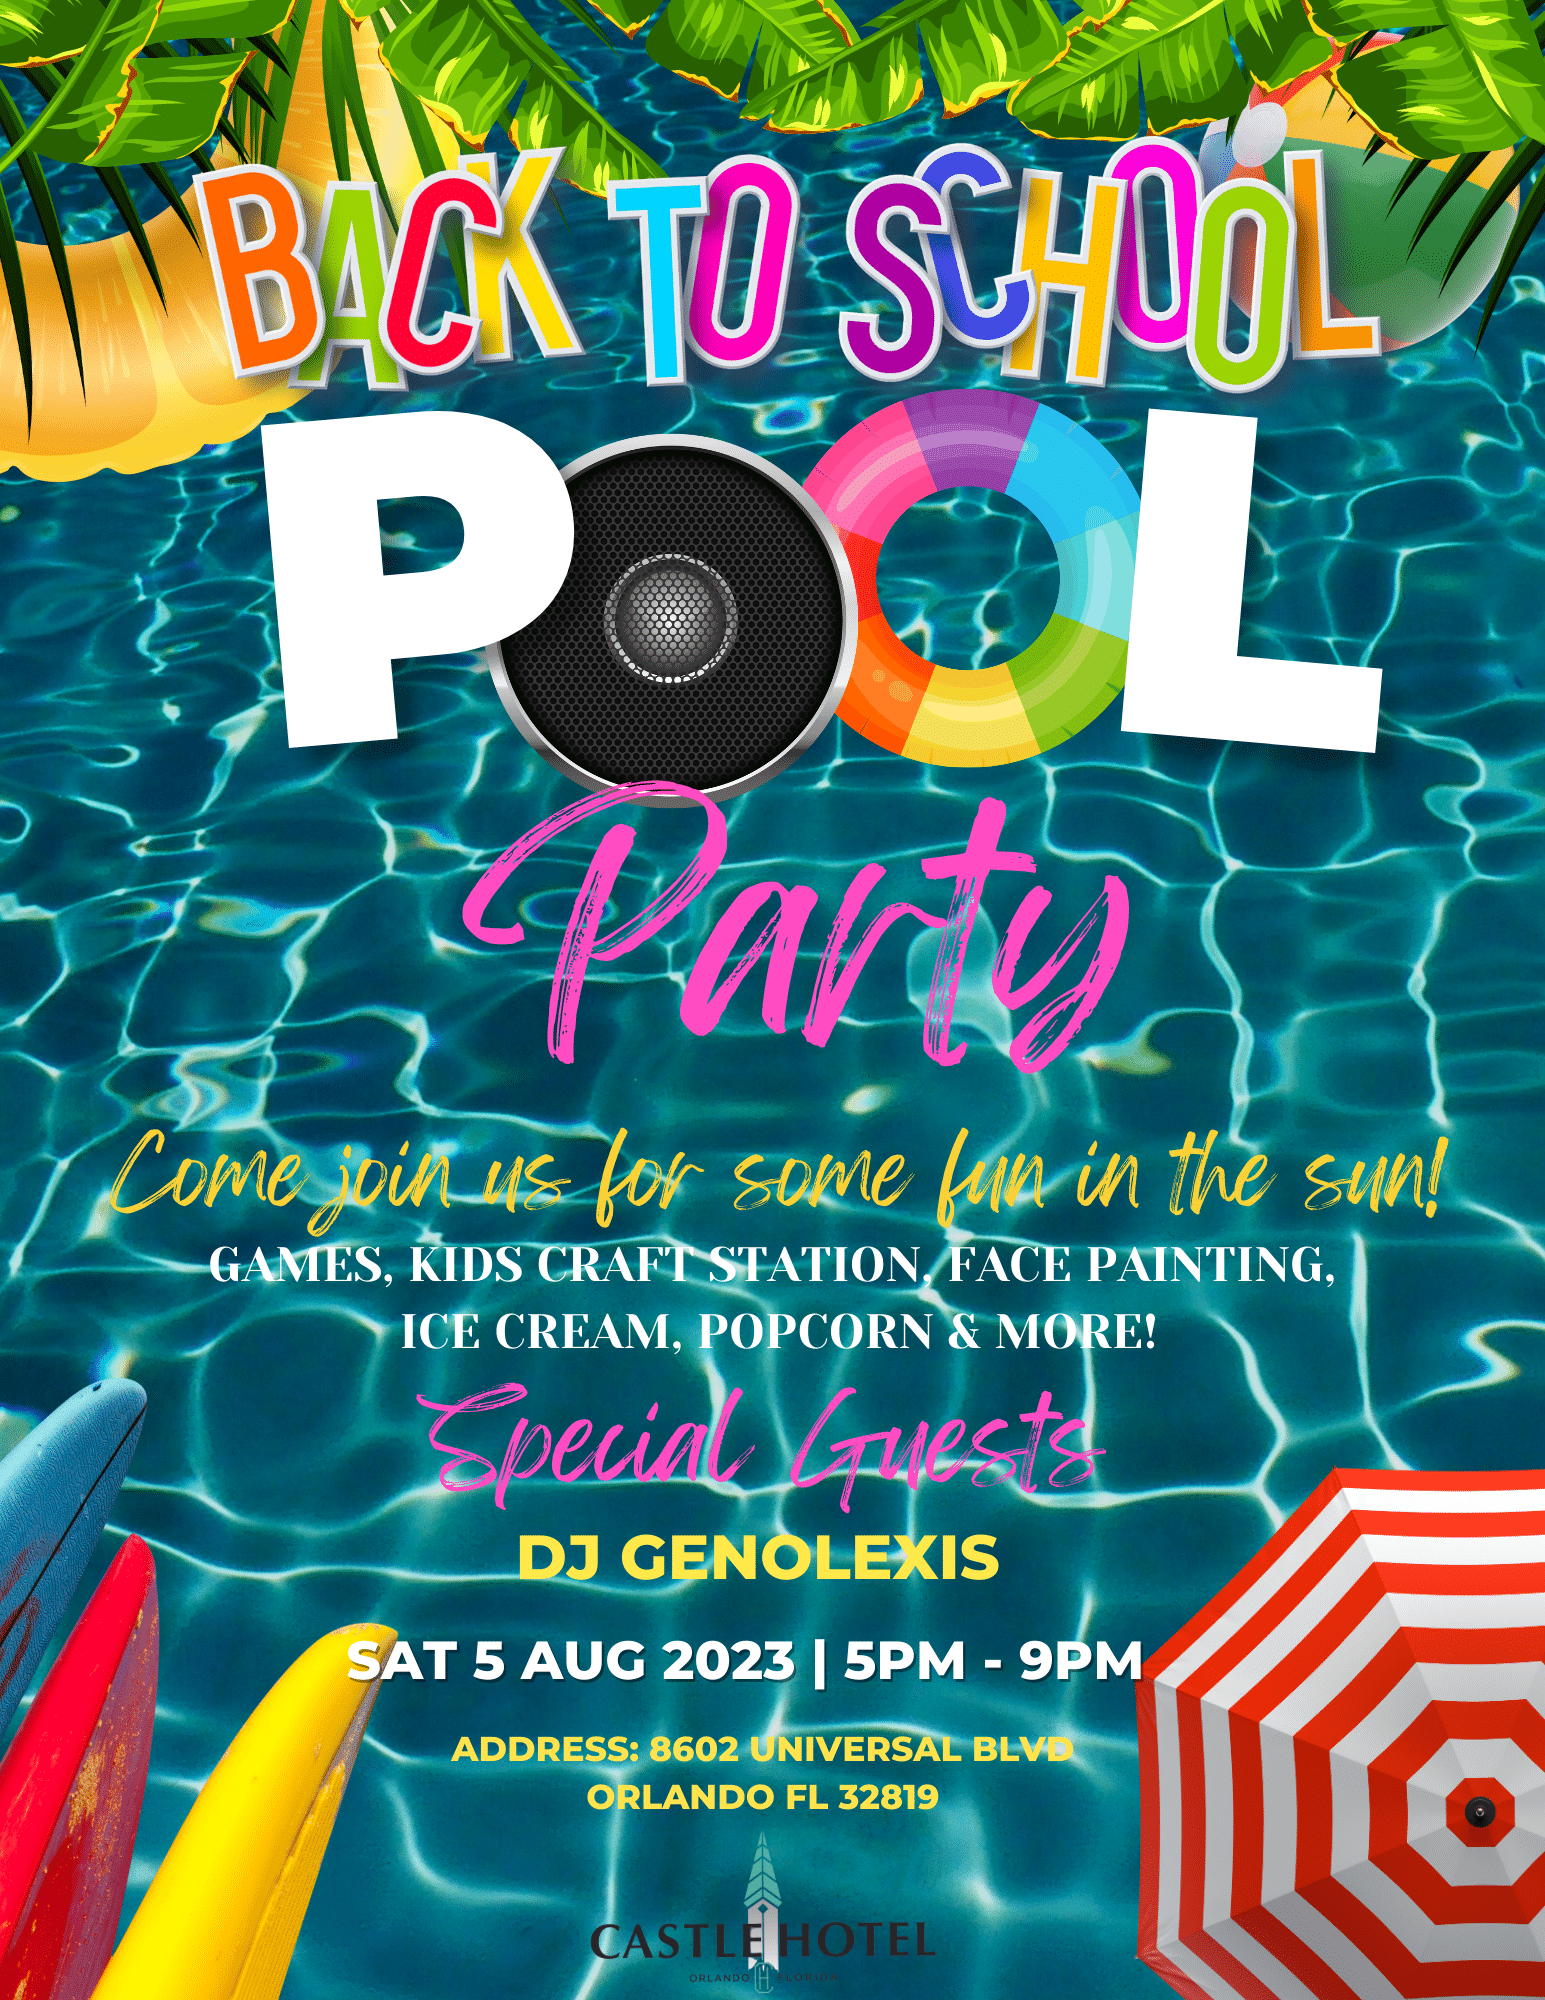 Castle Hotel Back to School Pool Party